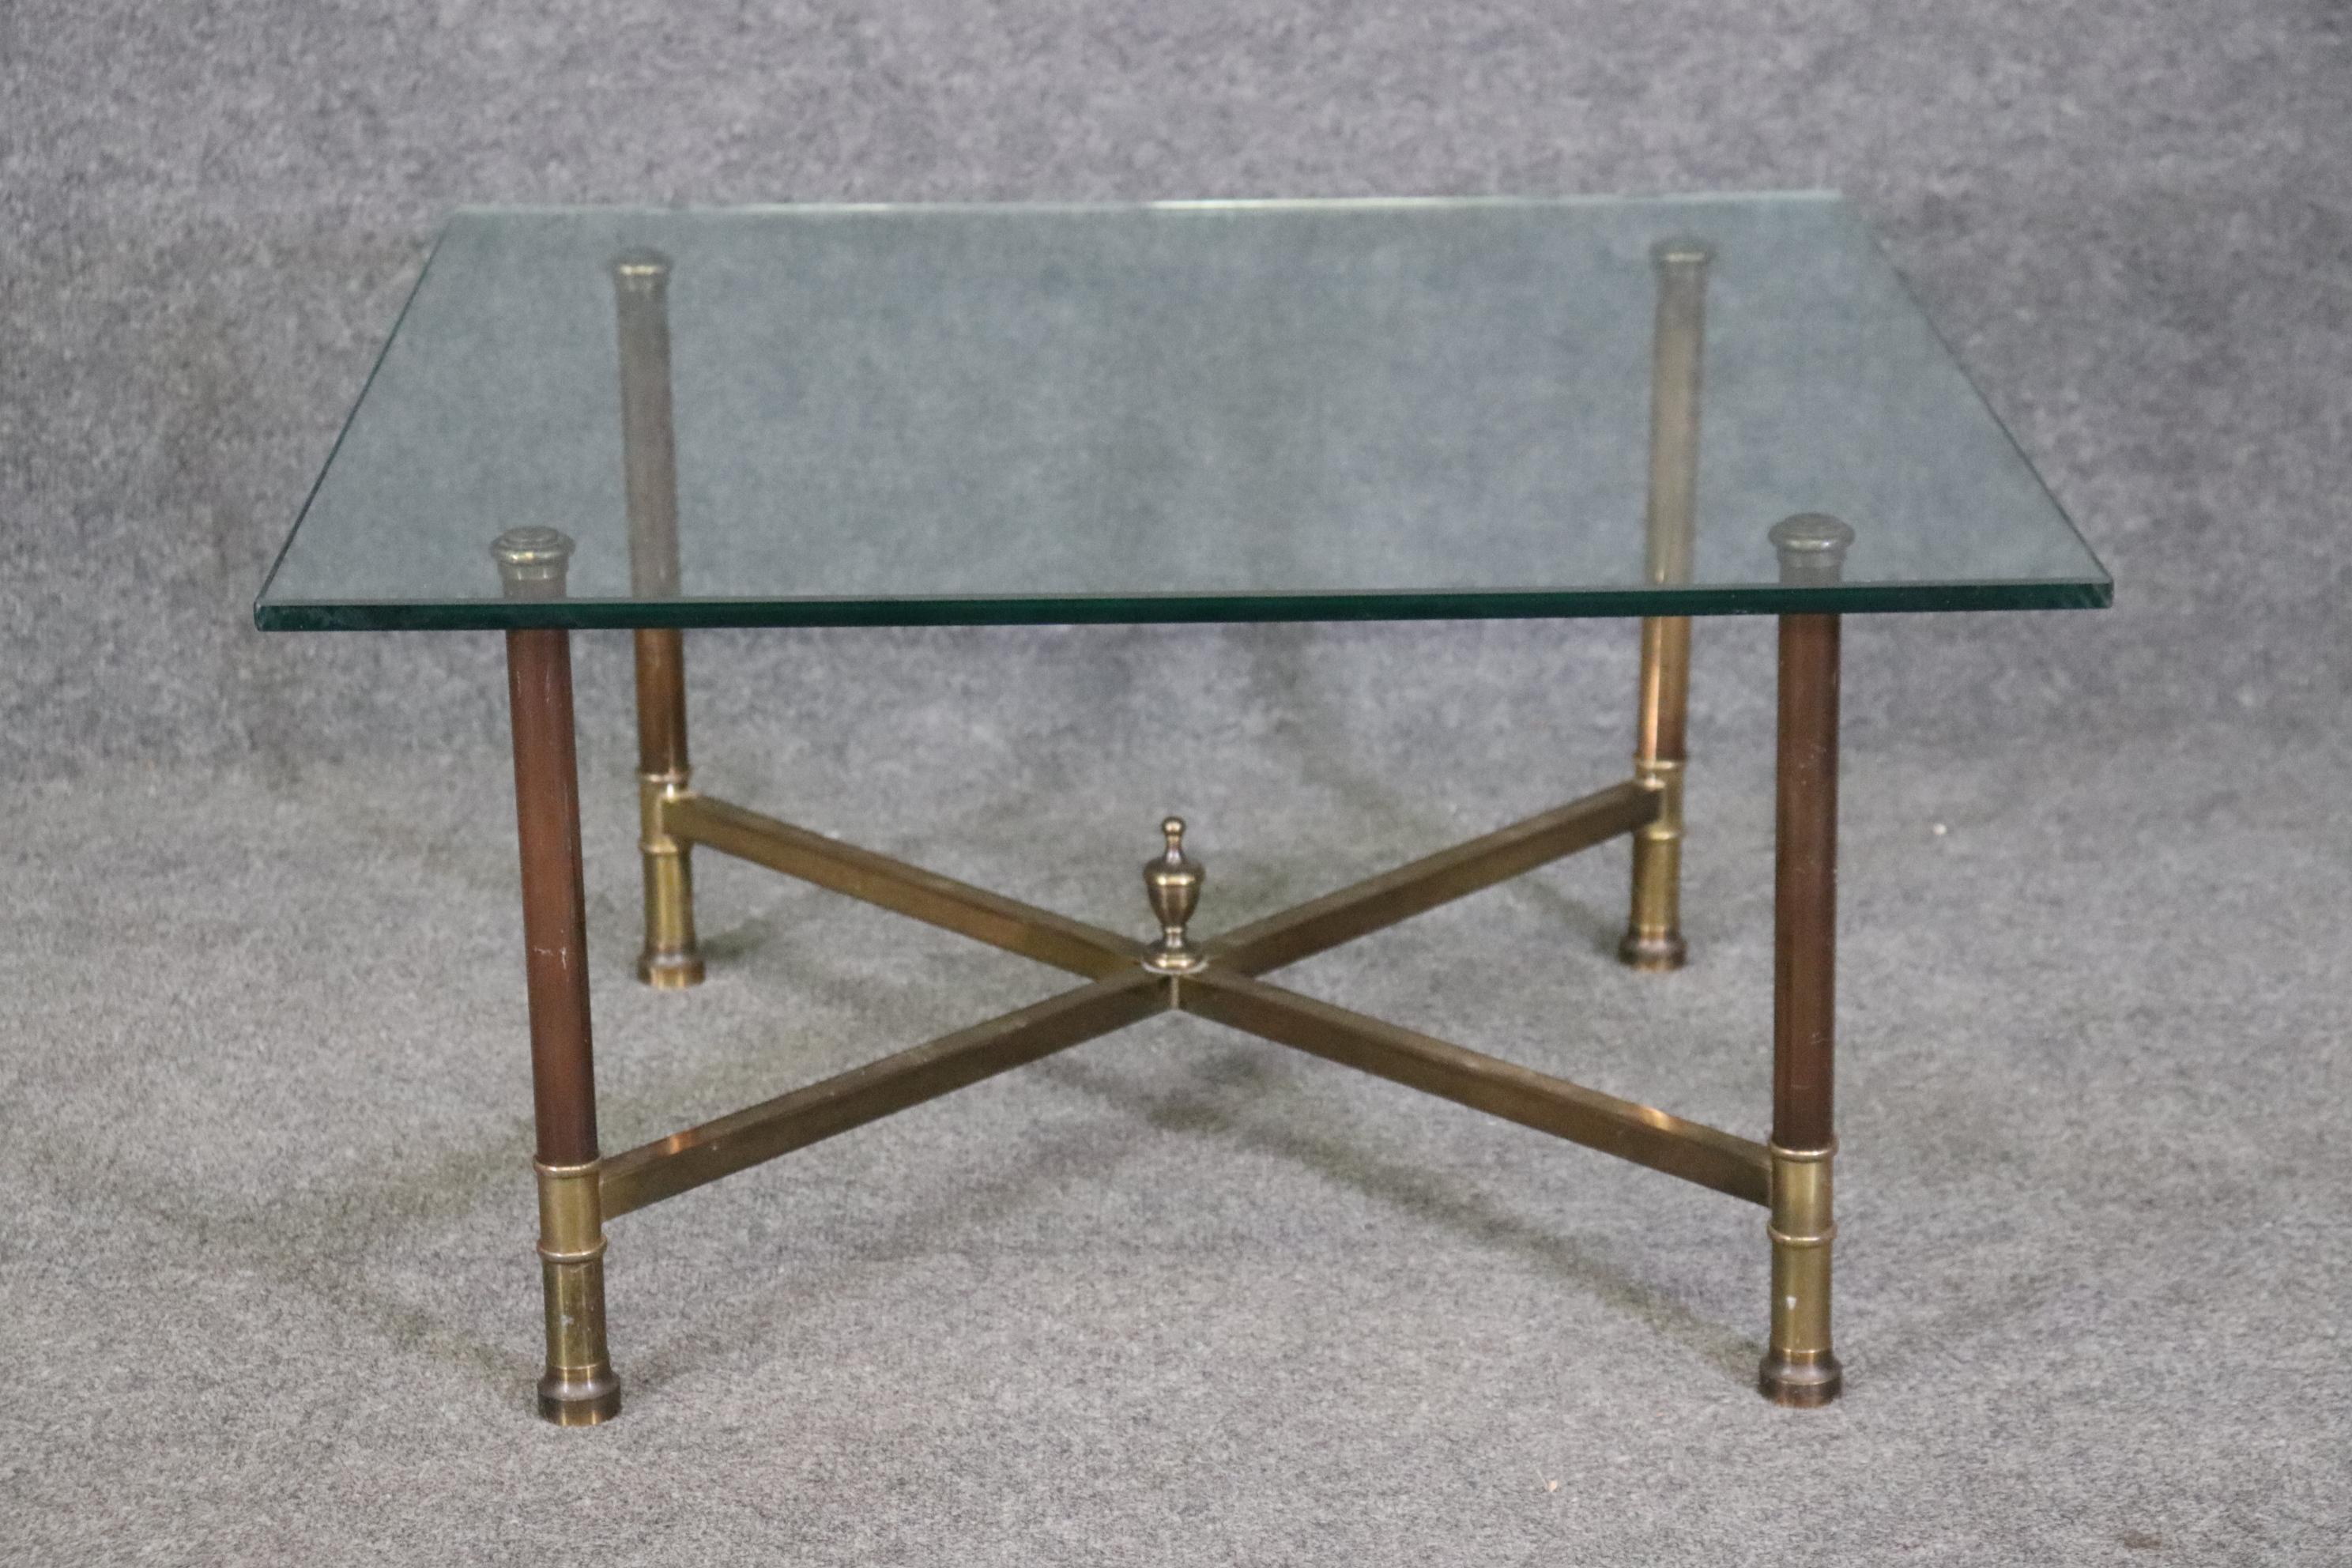 Dimensions: Height: 15 1/2 in Width: 28 in Depth: 28 in 
Large Glass Dimensions: H: 15 1/2in W: 36in D: 36in 

This French Maison Jansen Regency Style Brass Glass Top Coffee Table is not only of the highest quality, it is signed Jansen Paris! Maison